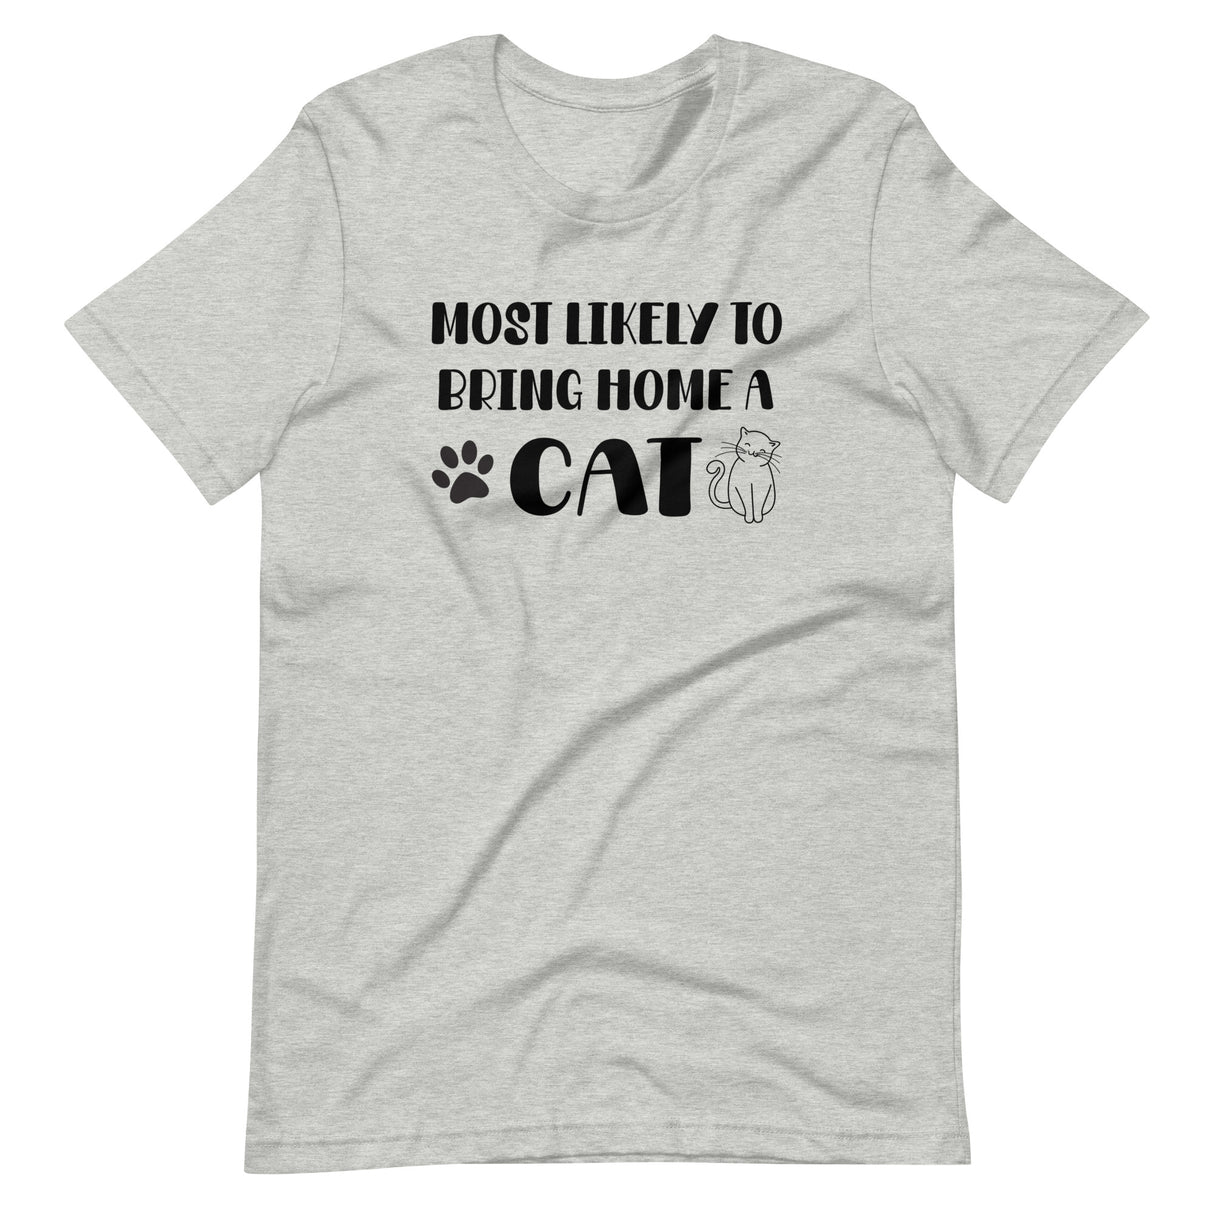 Most Likely To Bring Home a Cat Shirt